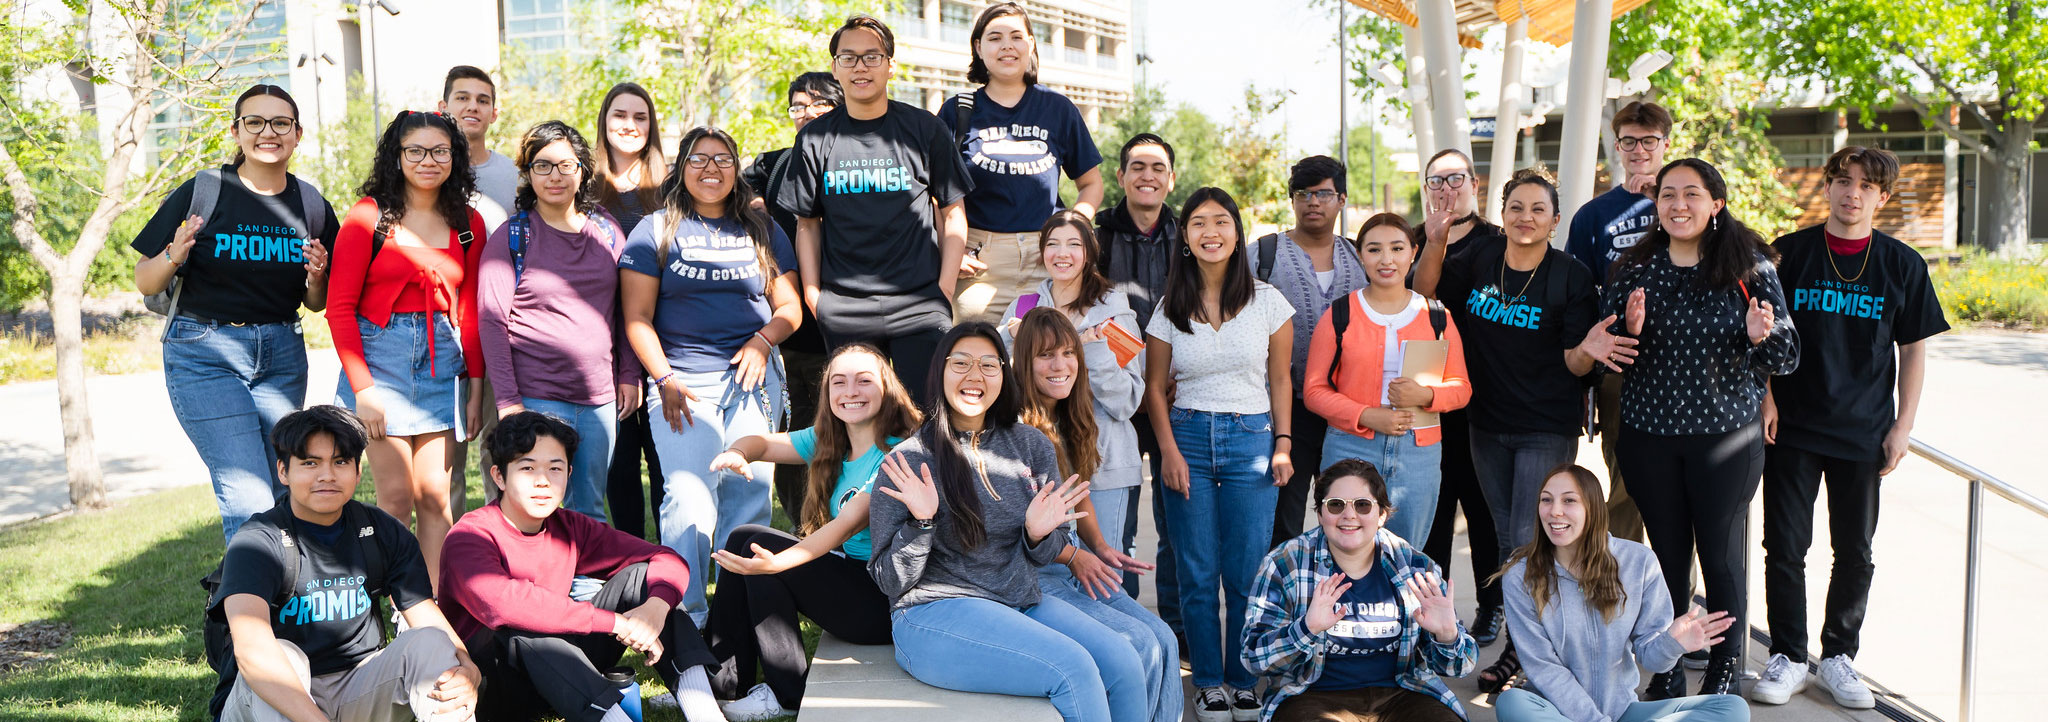 27 promise students are photographed as a group outside in the Mesa Quad